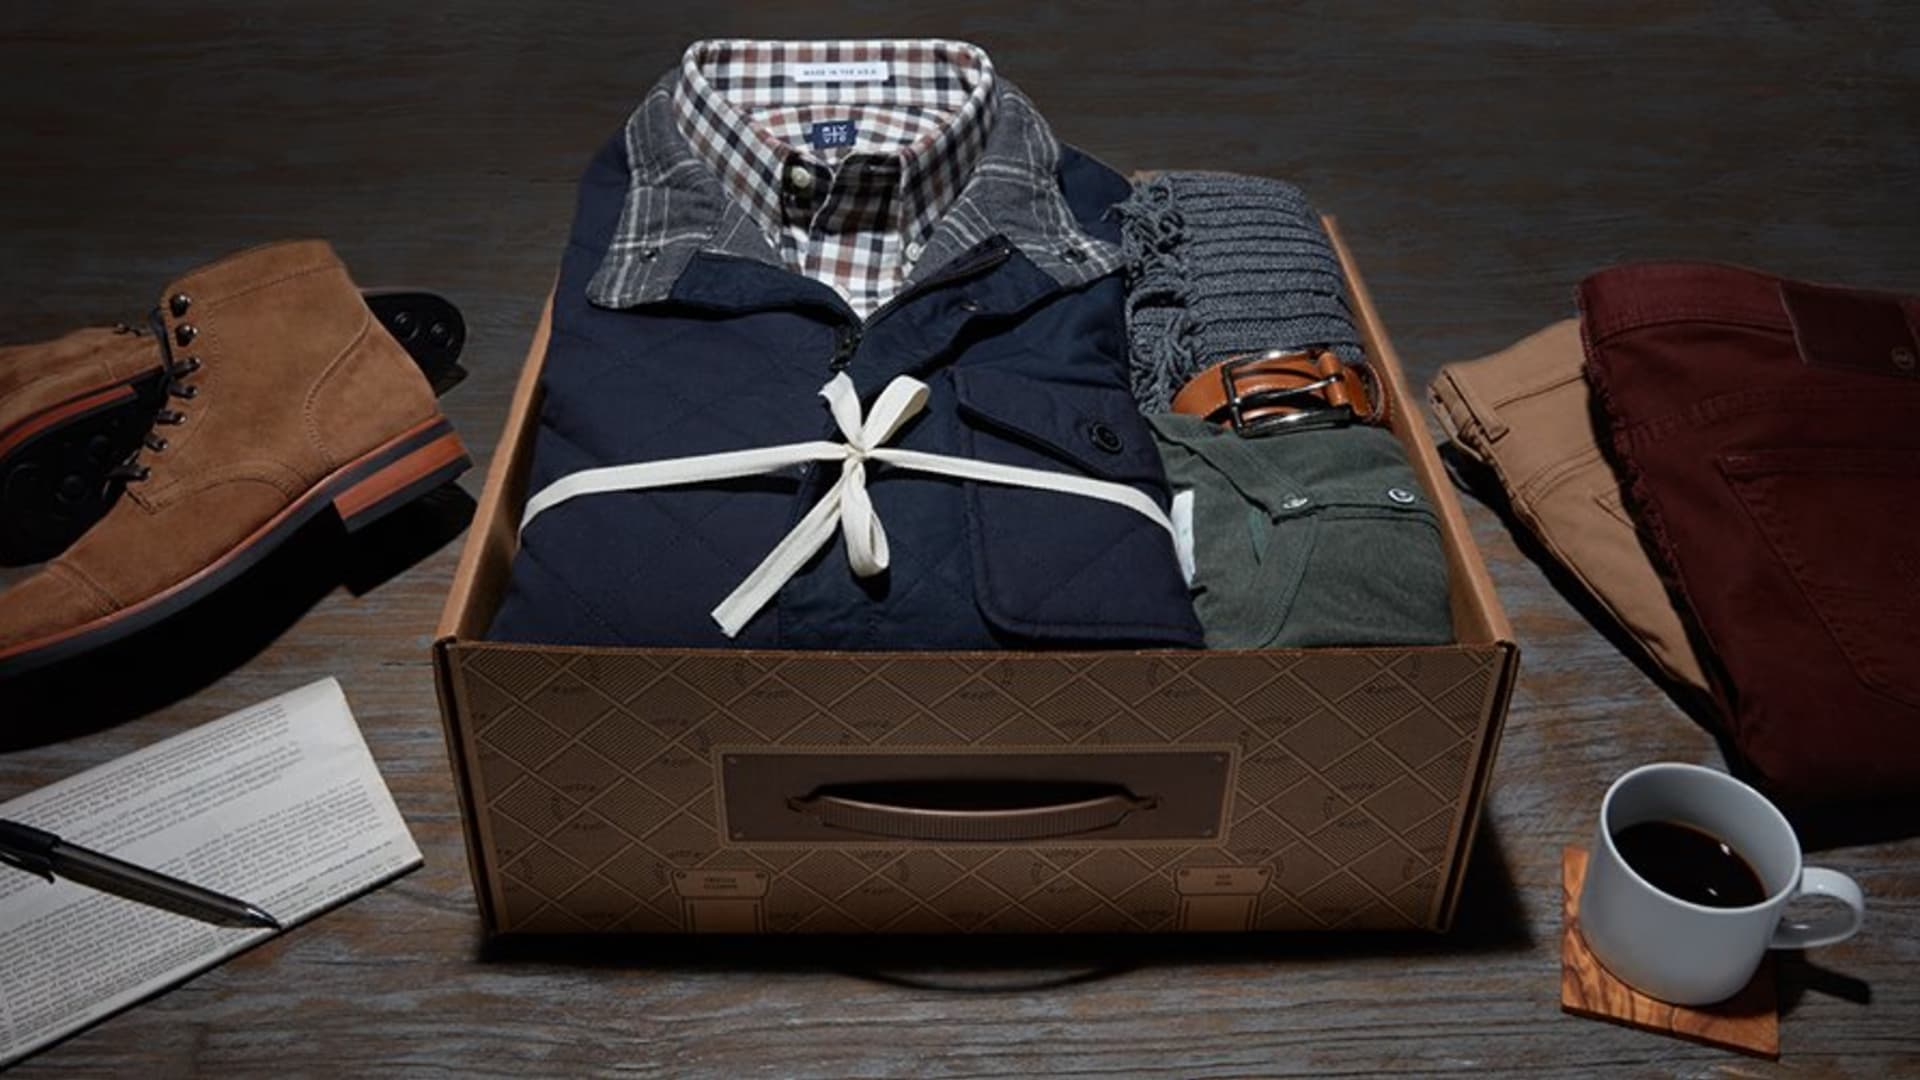 Why ‘box fatigue’ may be hitting the apparel industry, Stitch Fix